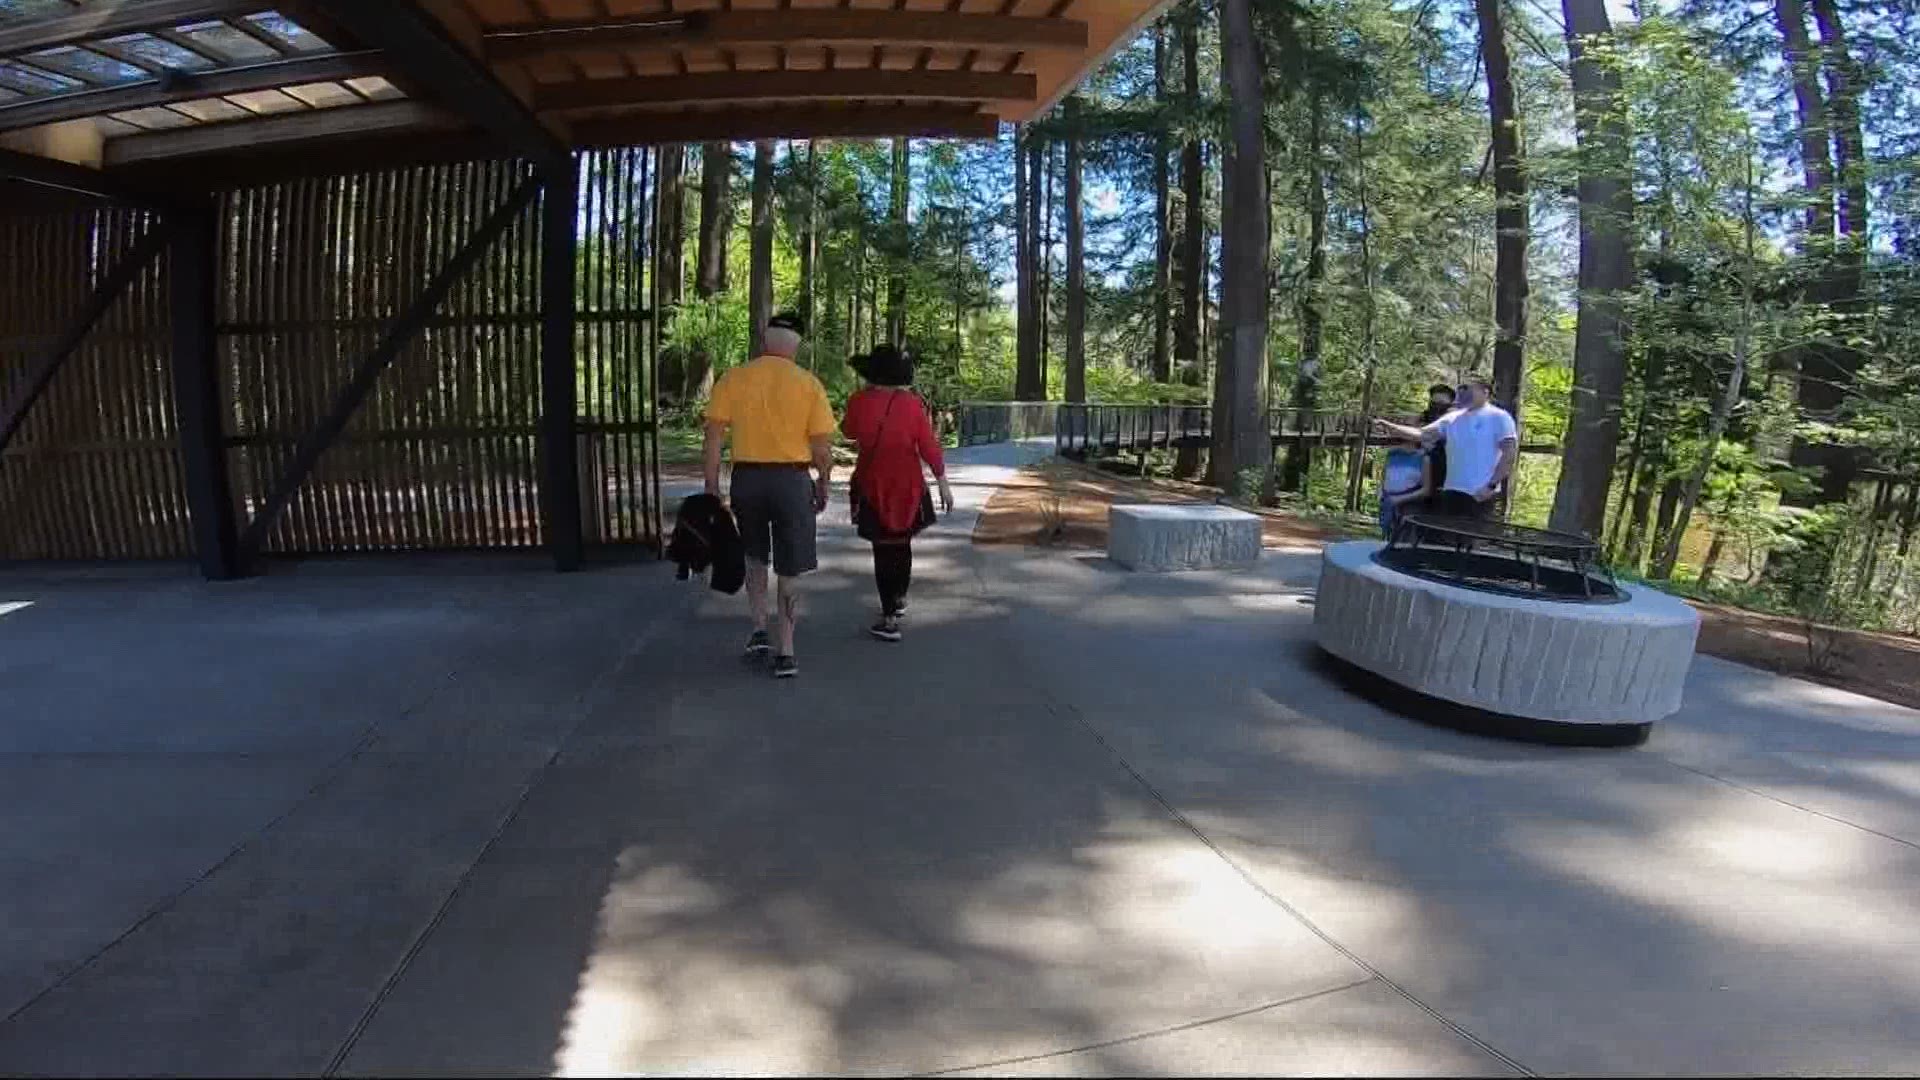 A hidden gem in Portland has reopened with some major upgrades. Steven Redlin shows us what’s new at the Leach Botanical Garden.